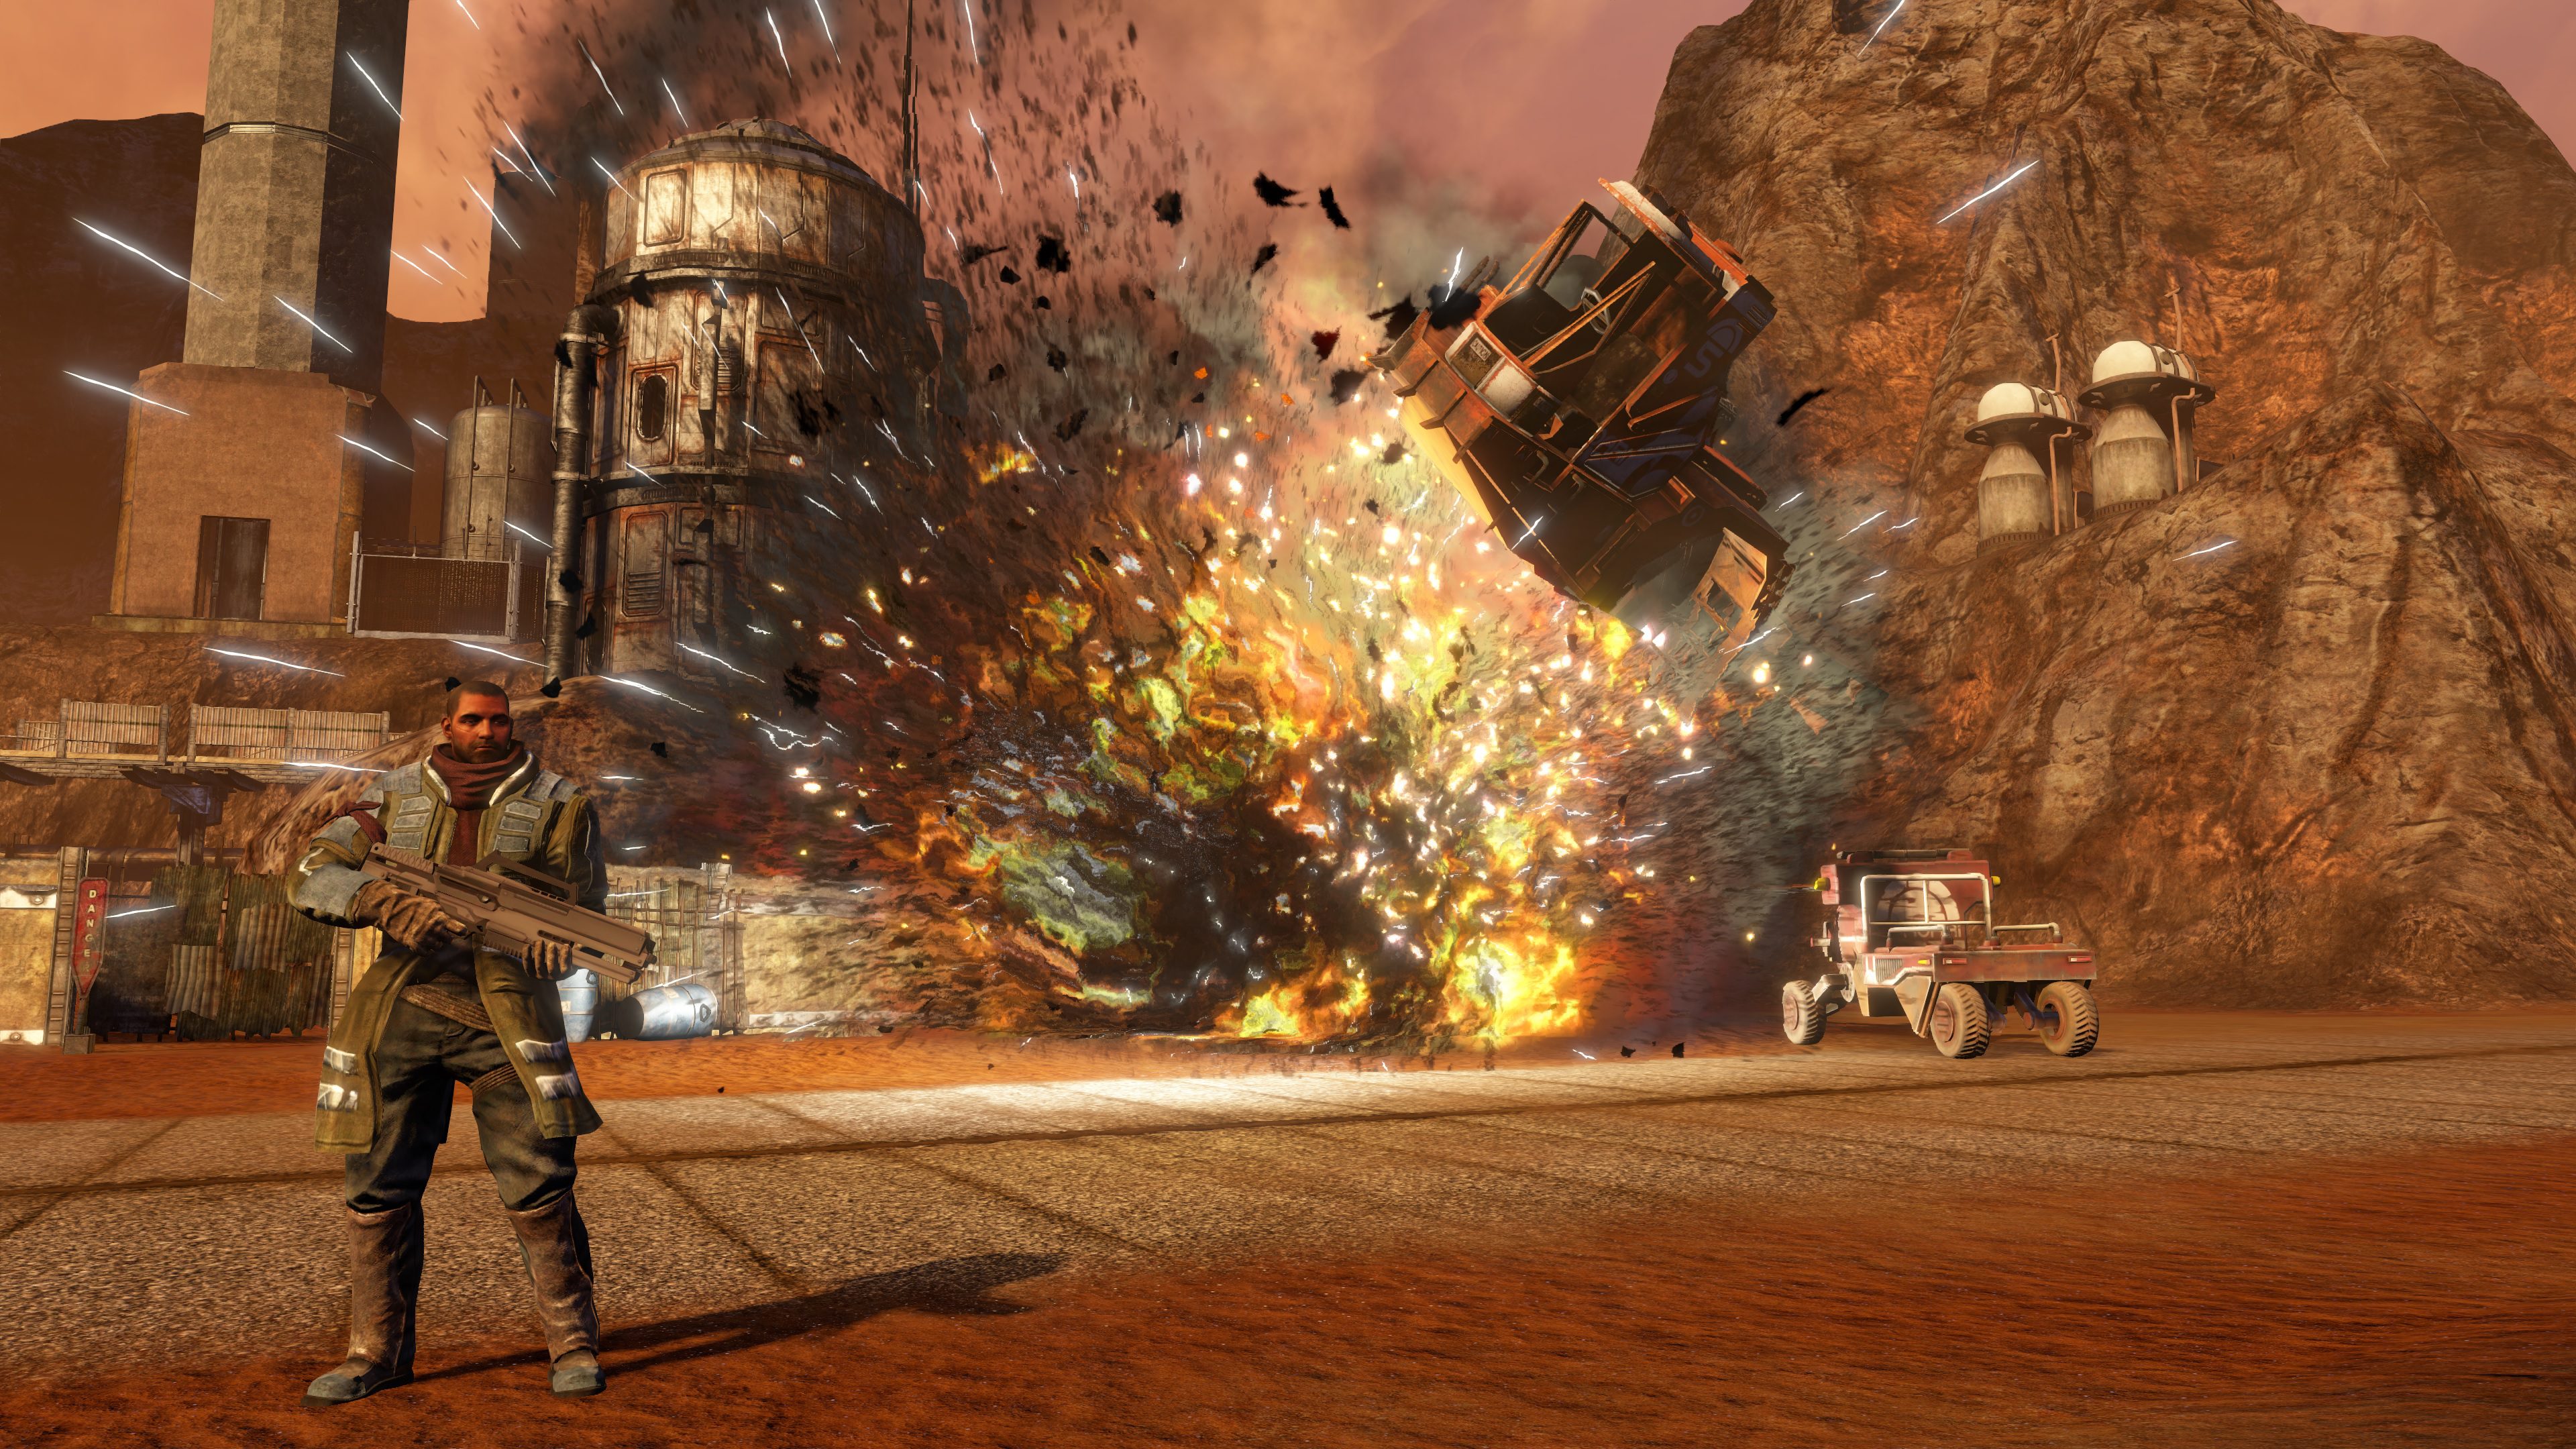 Red Faction Guerrilla Re-Mars-tered edition is coming to PC and consoles